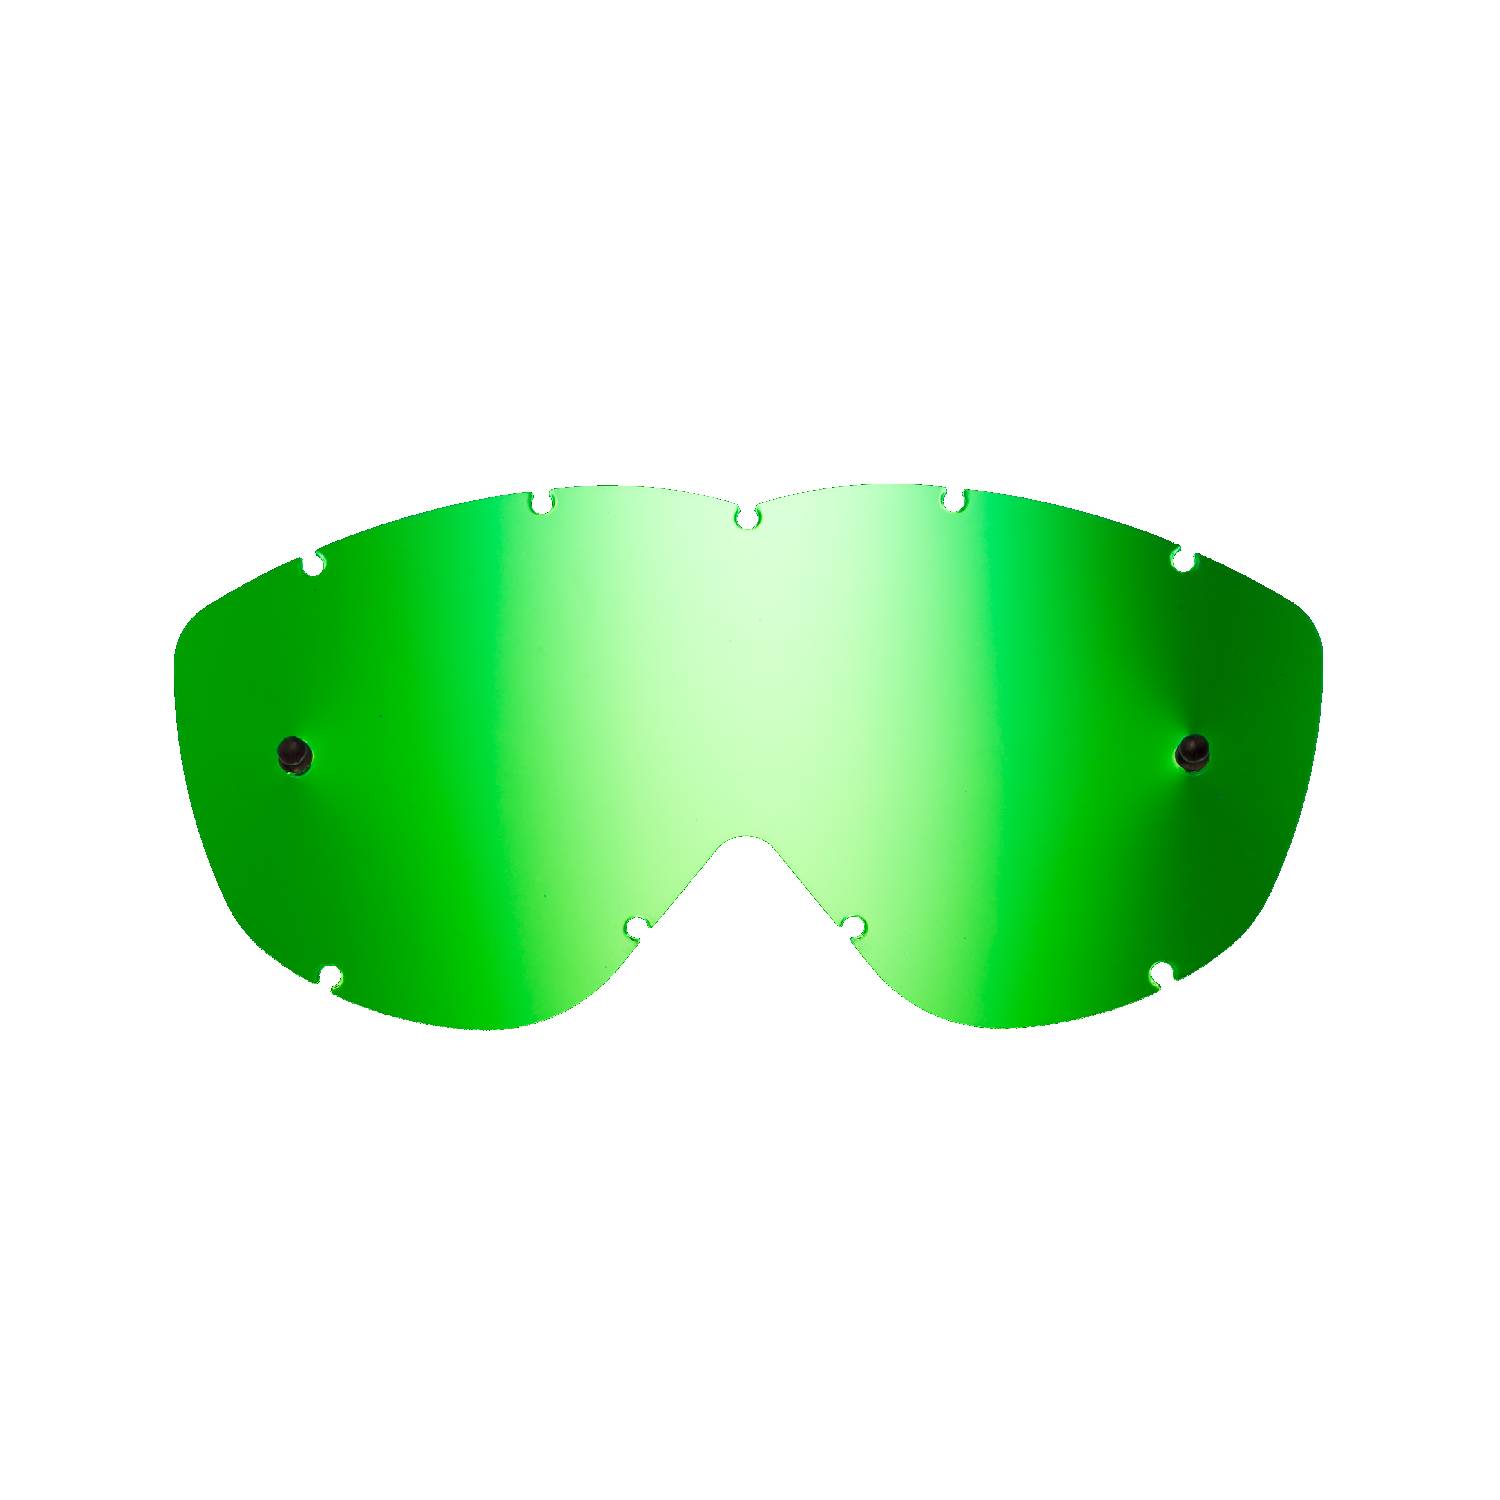 green-toned mirrored replacement lenses for goggles compatible for Spy Alloy / Targa goggle